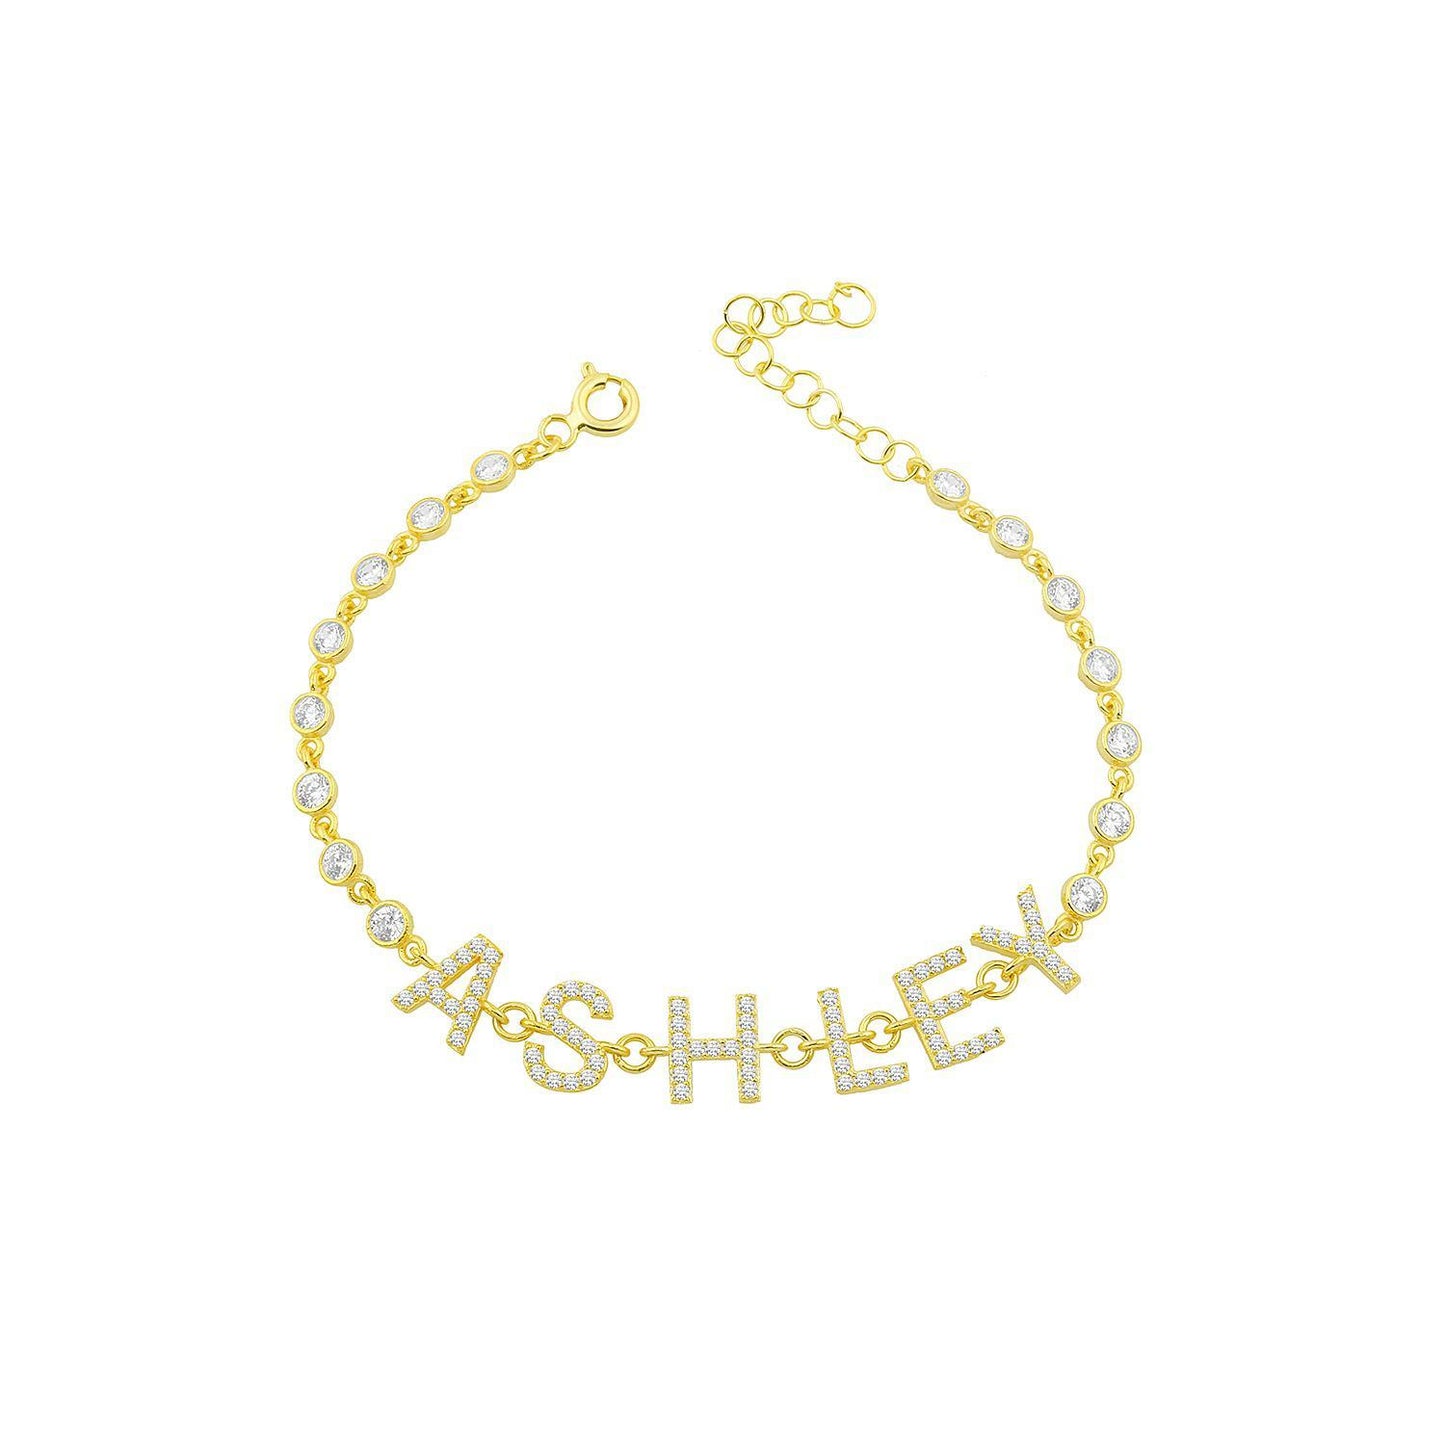 It's All in a Name™ Personalized Bracelet JEWELRY The Sis Kiss Gold with Crystals